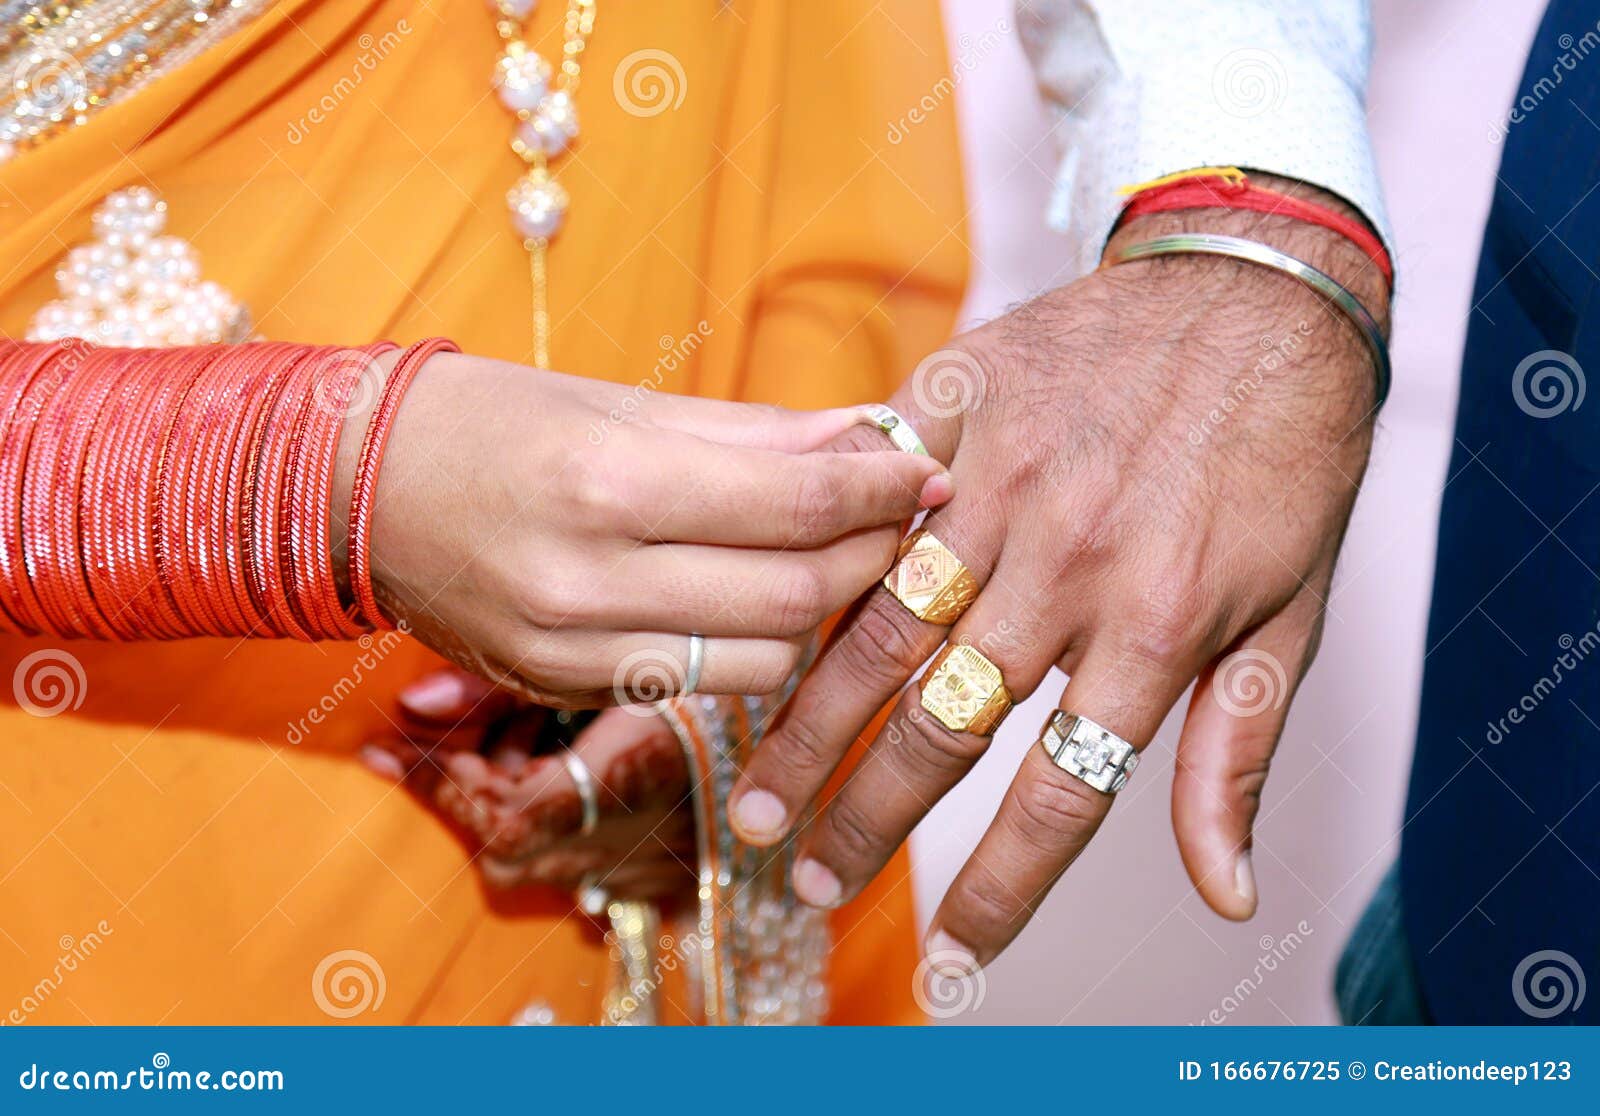 Why Engagement Rings Are Always Worn On The Fourth Finger Of Left Hand?  There's A Logic Behind This | Wedding ring finger, Indian wedding fashion,  Wedding ring collections